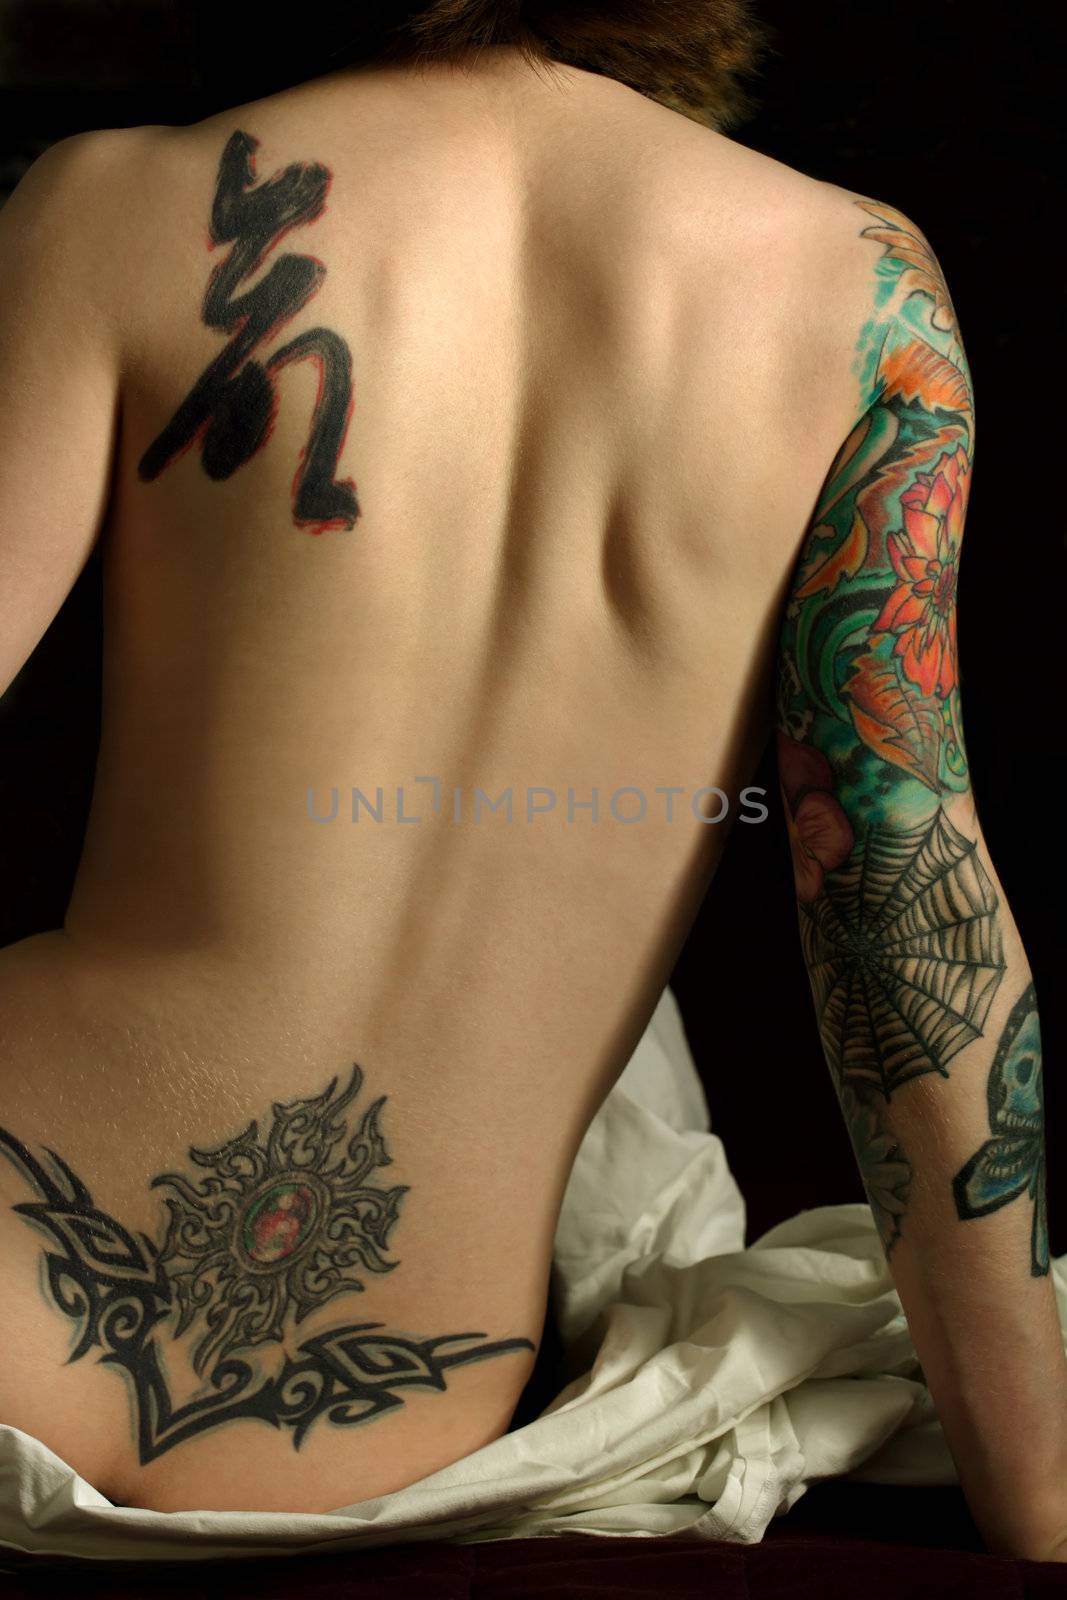 A young slim women with arm and back tattoos sitting on the bed in a dark room.
